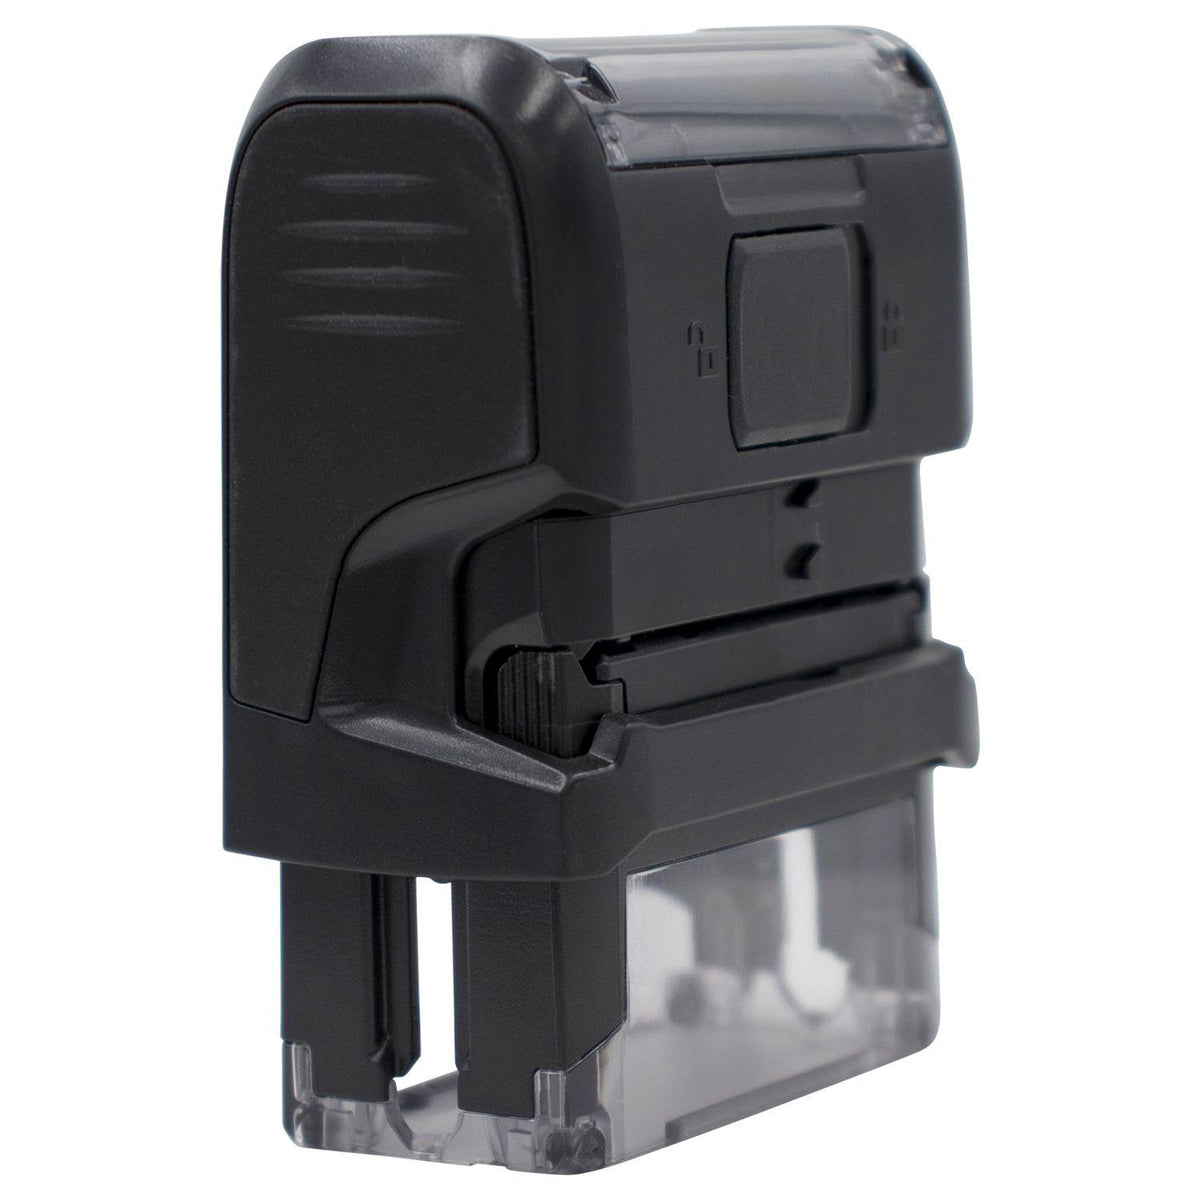 Self-Inking Archivado Stamp - Engineer Seal Stamps - Brand_Trodat, Impression Size_Small, Stamp Type_Self-Inking Stamp, Type of Use_Office